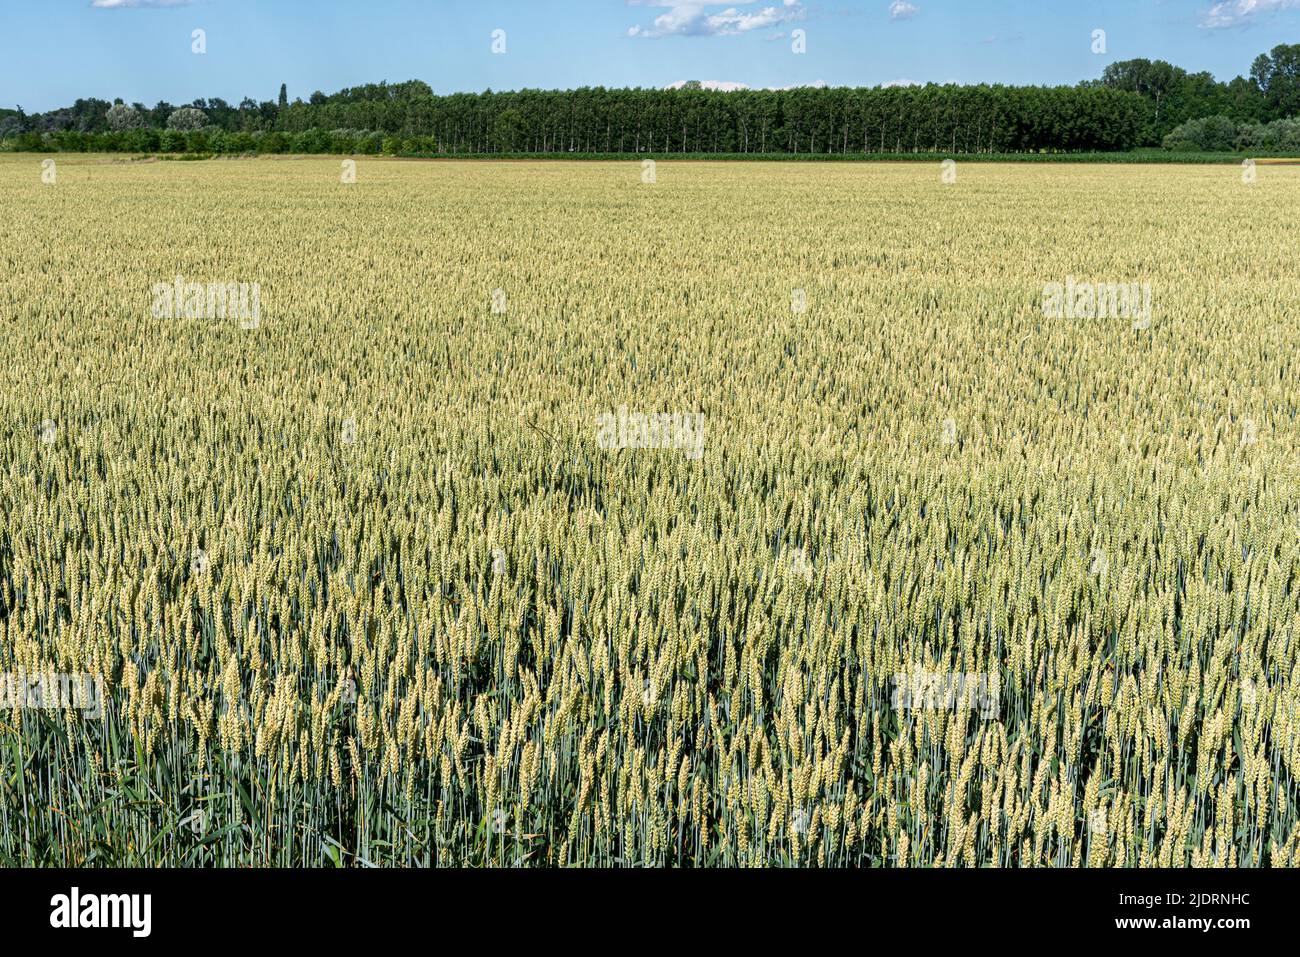 Green wheat field in spring with poplar trees in the background in the Po valley in the province of Cuneo, Italy Stock Photo